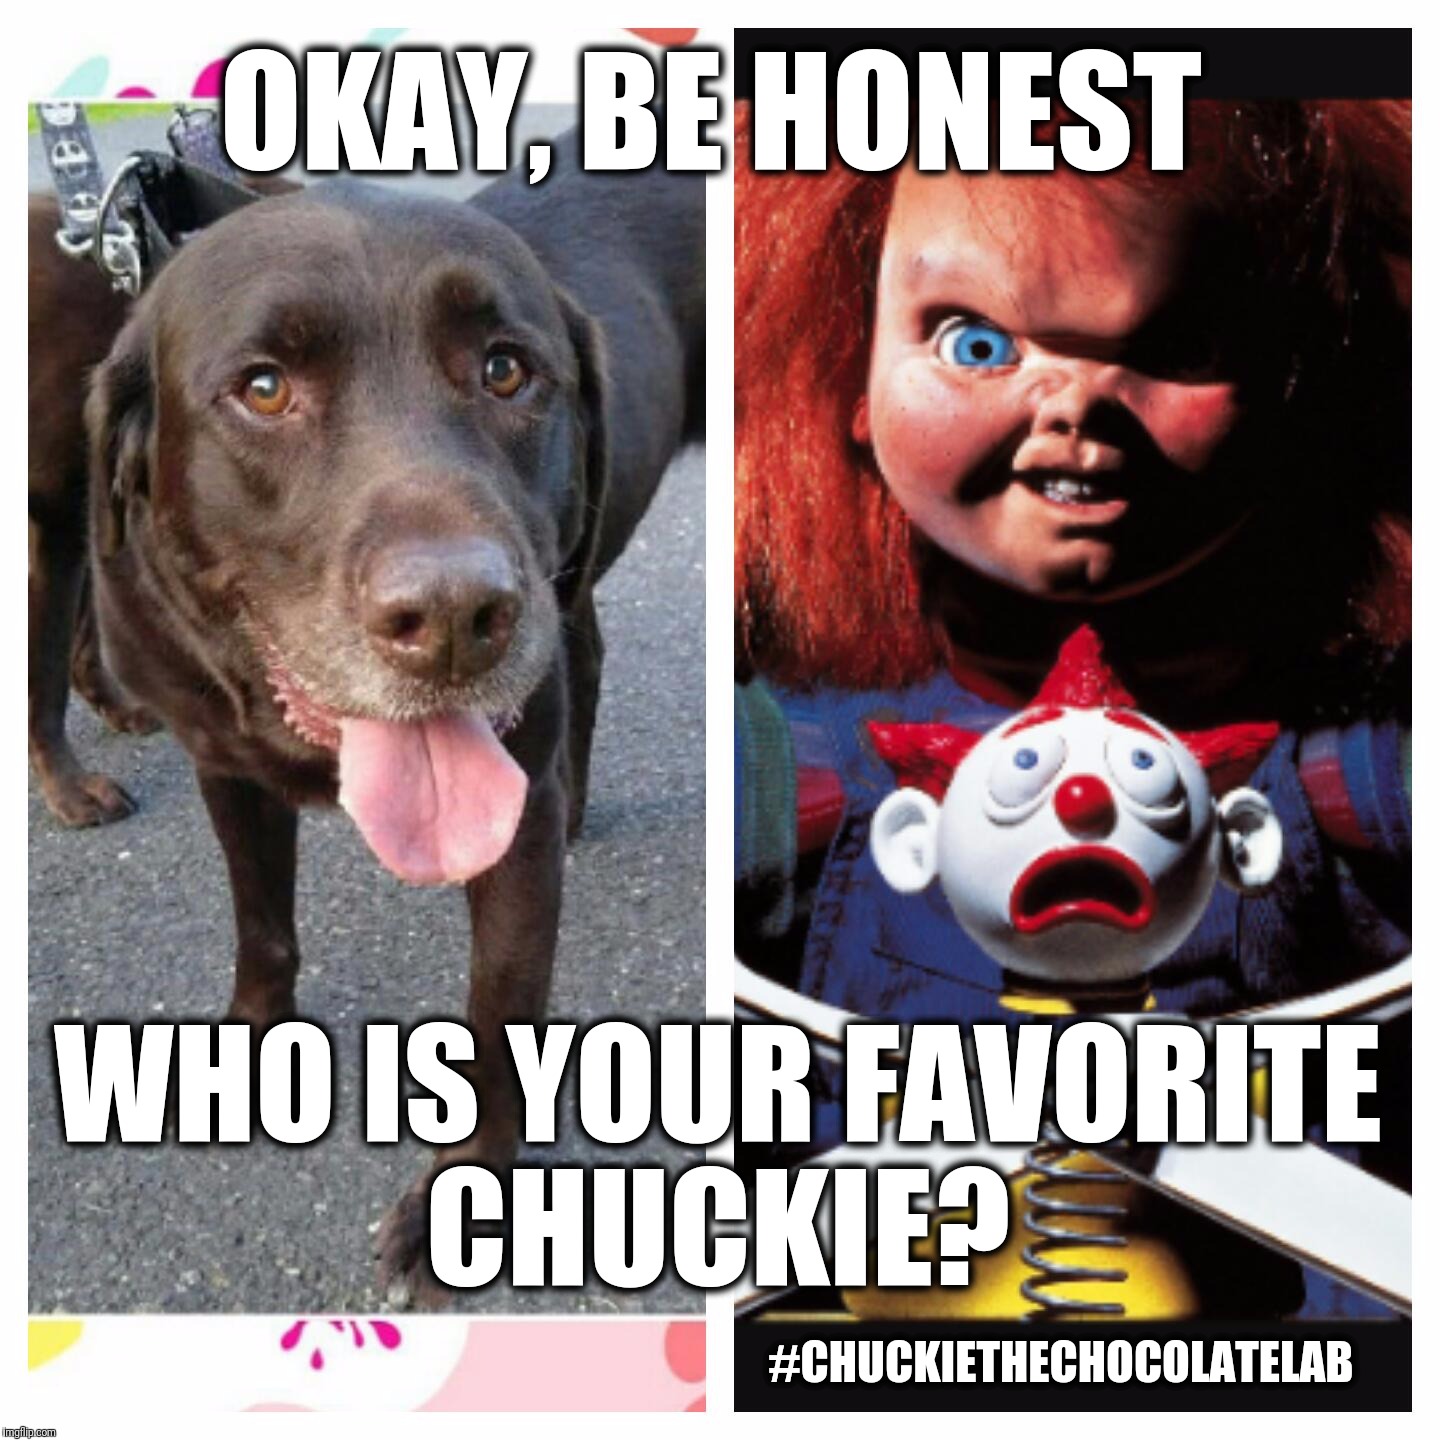 Who is your favorite Chuckie?  |  OKAY, BE HONEST; WHO IS YOUR FAVORITE CHUCKIE? #CHUCKIETHECHOCOLATELAB | image tagged in chuckie the chocolate lab,chucky,funny,dogs,memes,labrador | made w/ Imgflip meme maker